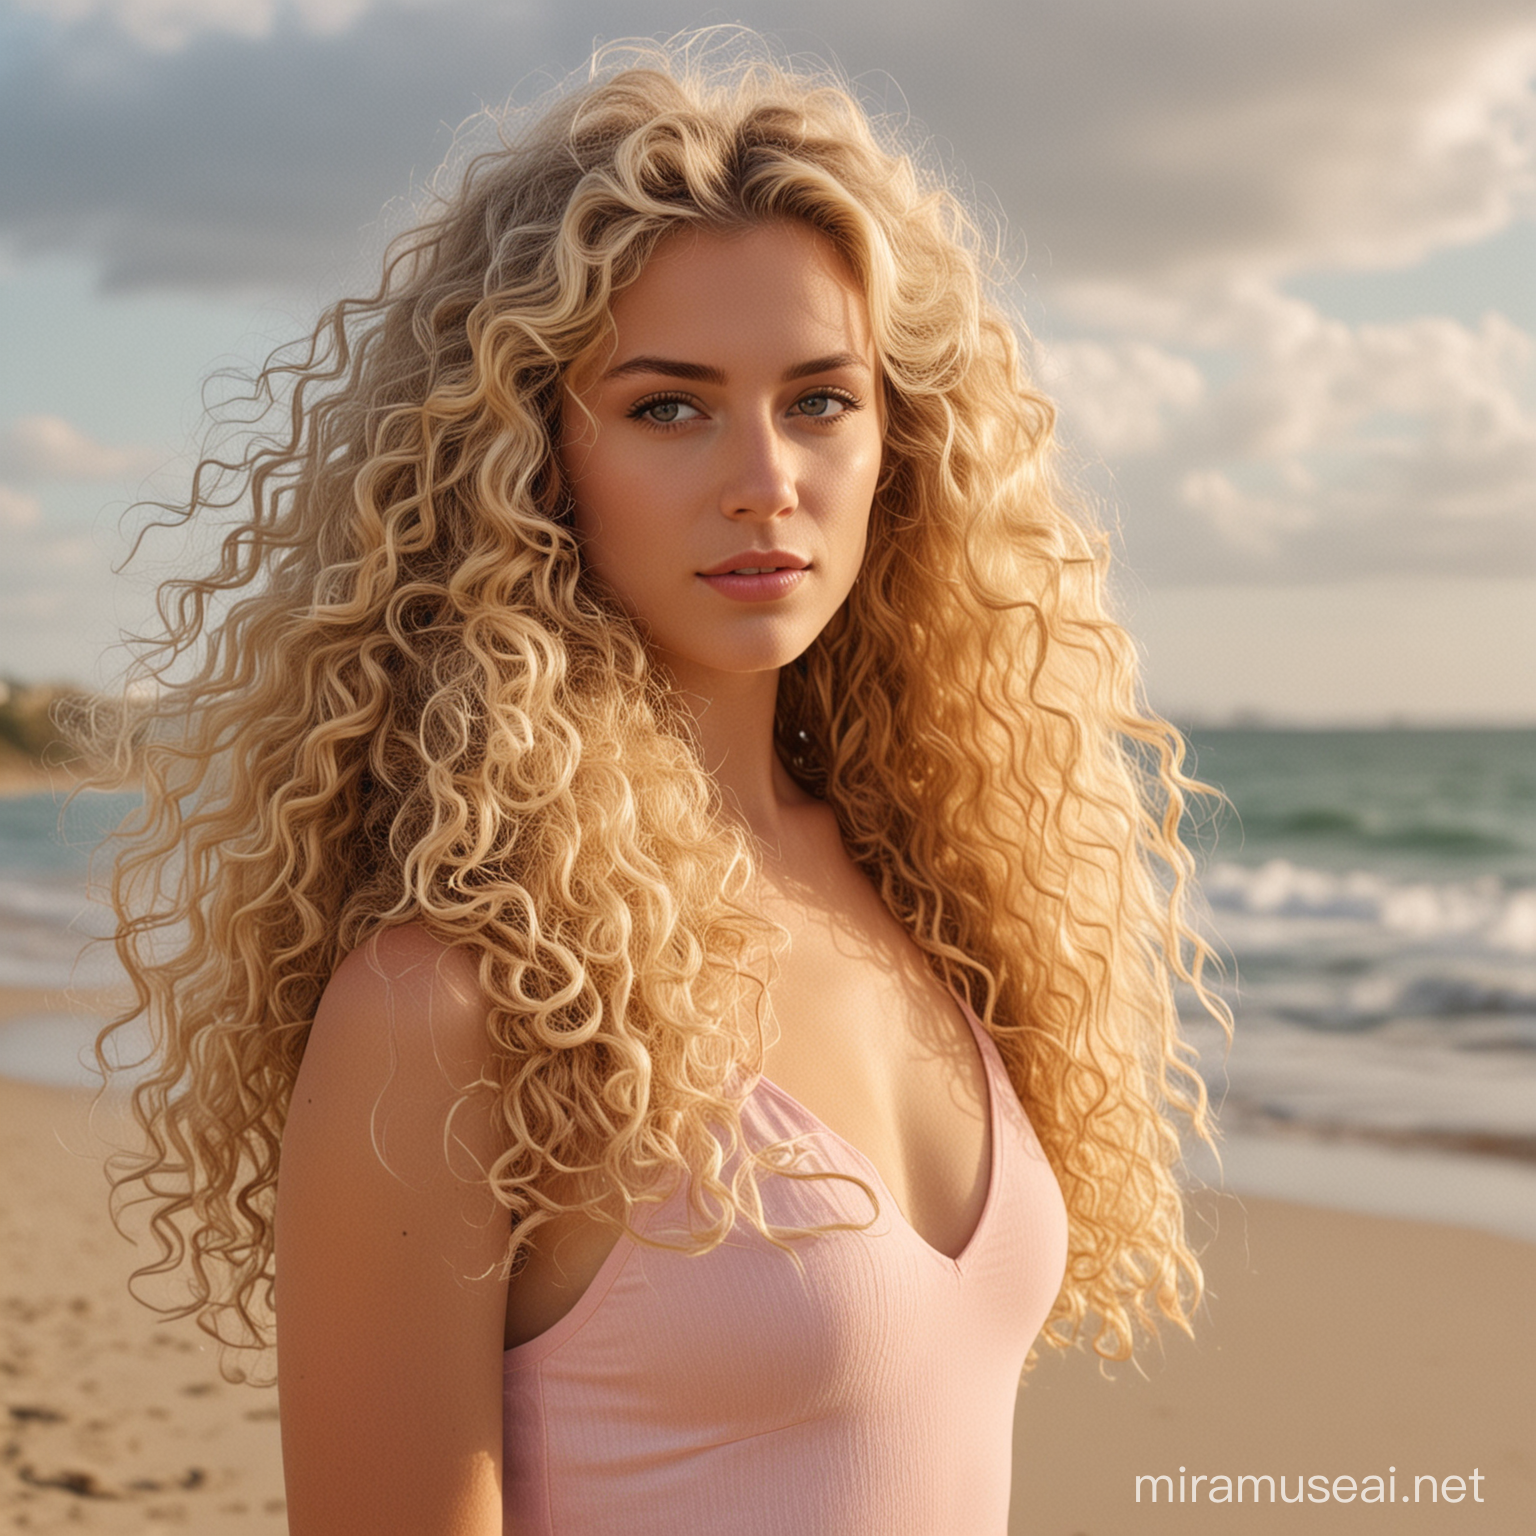 Blonde Woman with Retro 80s Style Curly Hair Standing on Beach